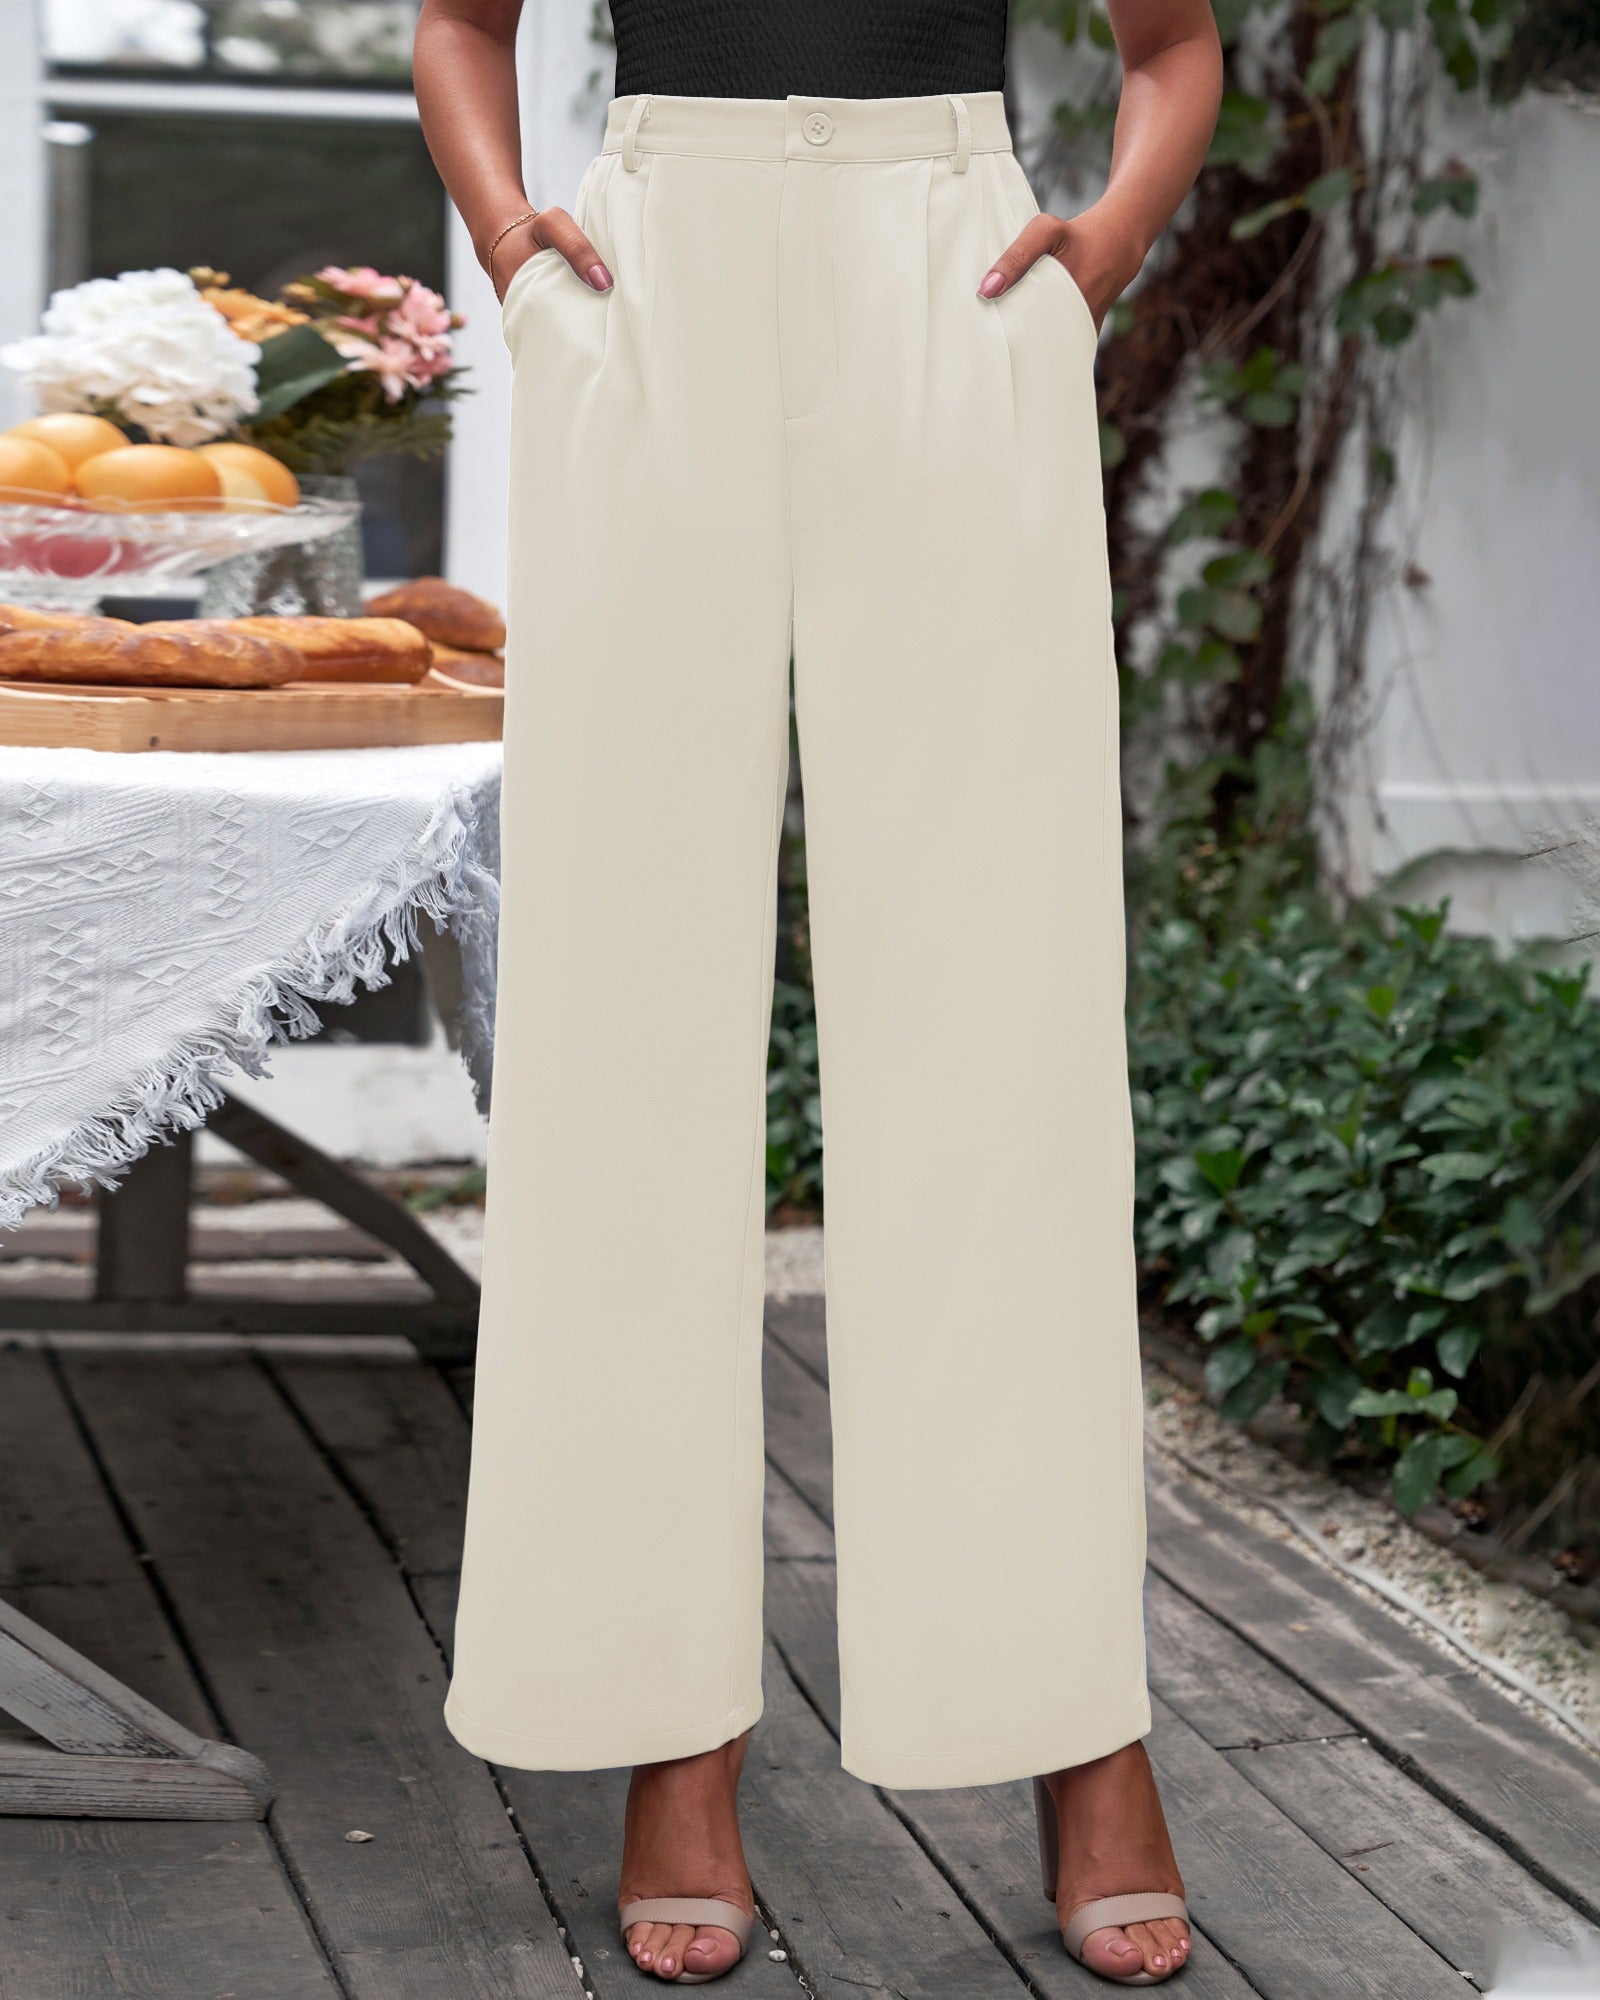 Women's Casual Dress Pants Business Office Casual High Waisted